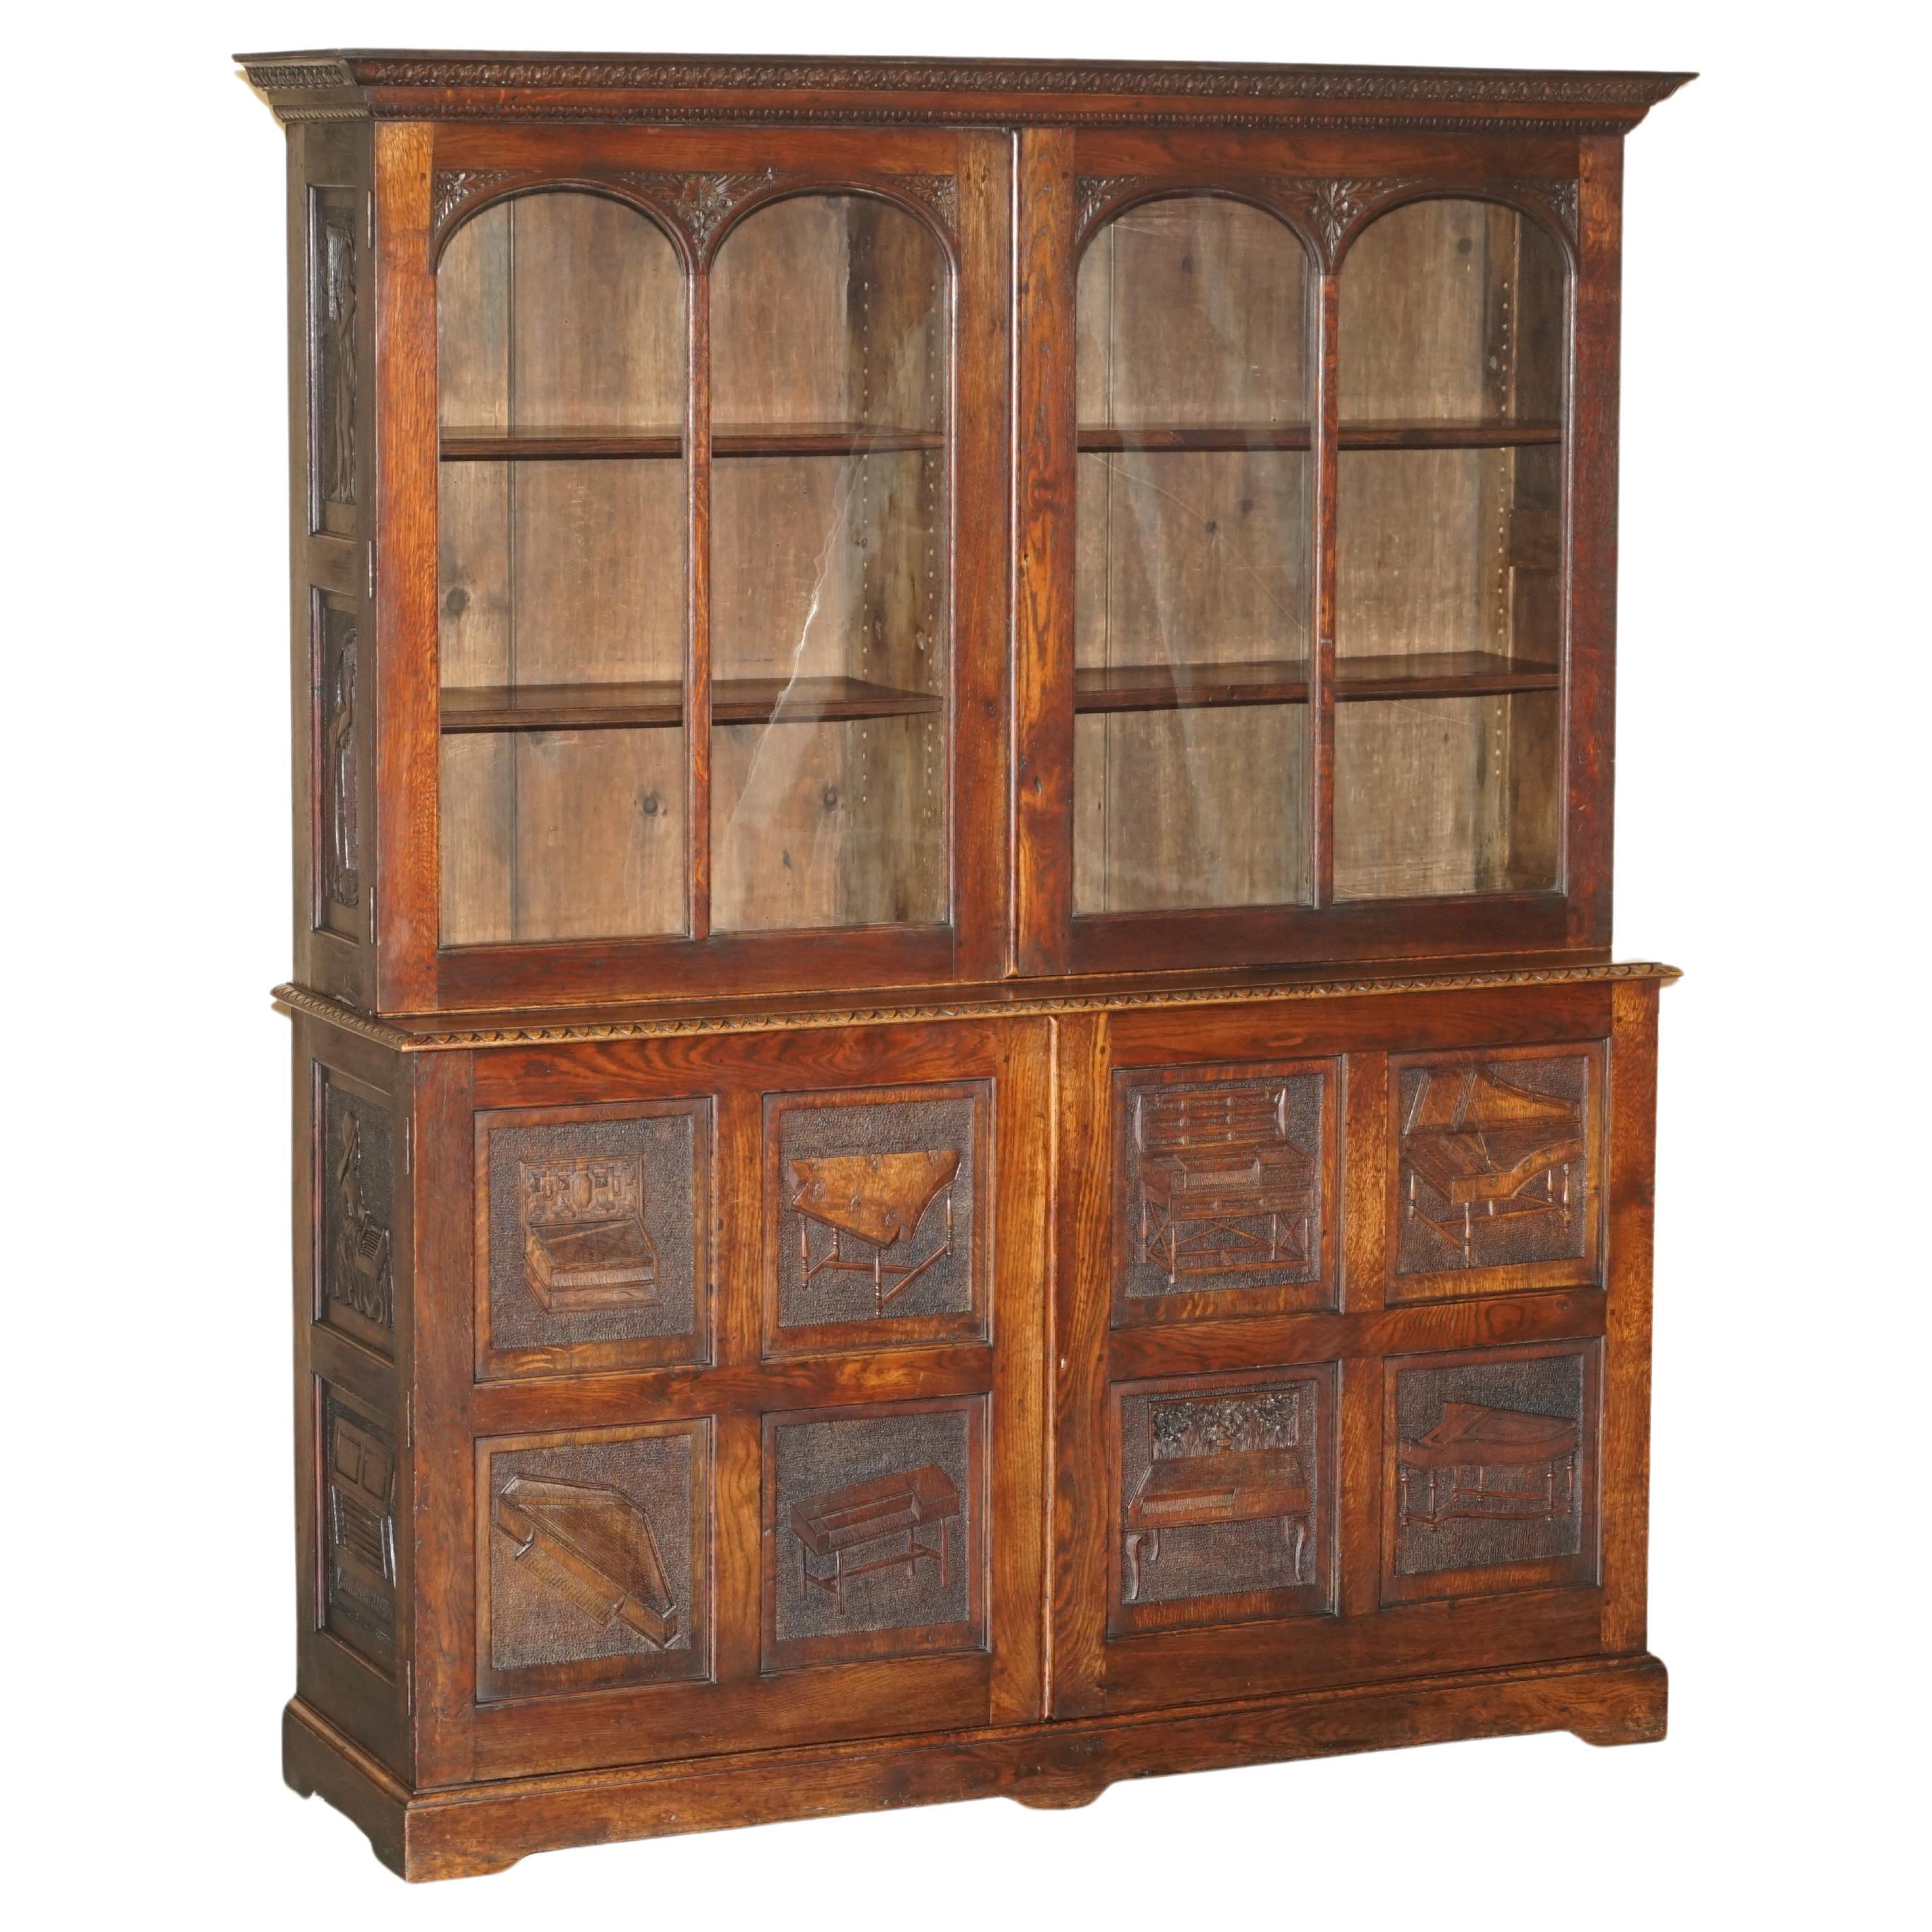 ES BOOKCASE CABiNET FROM THE BATE COLLECTION IN OXFORD UNIVERSITY im Angebot